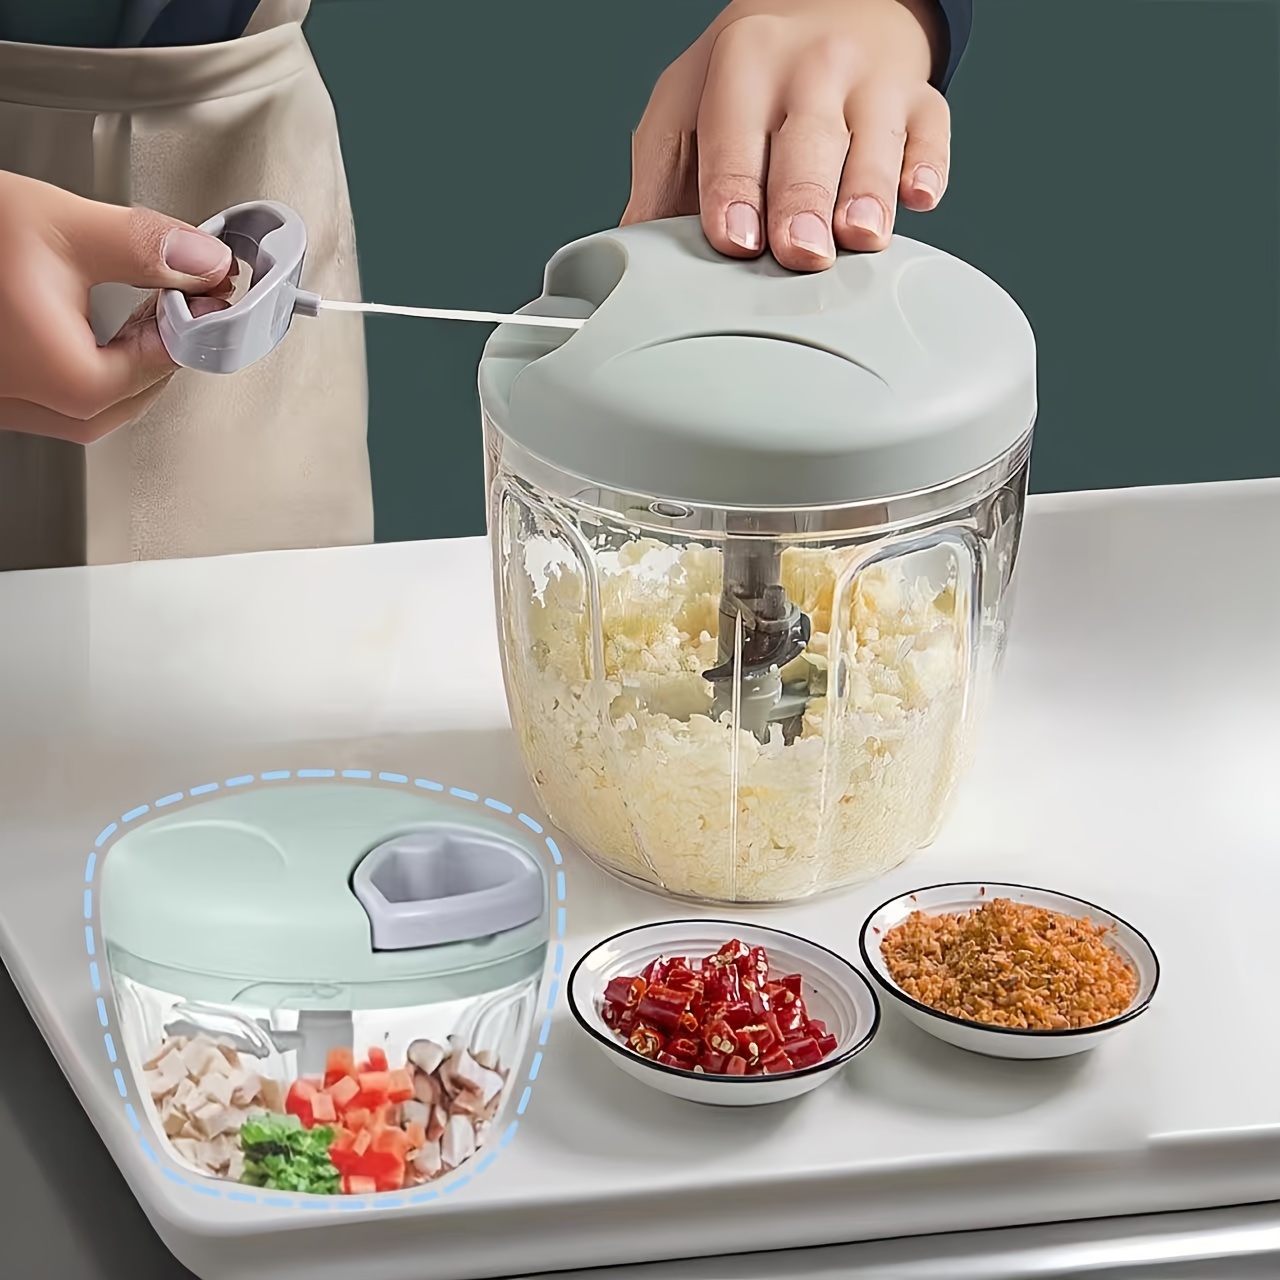 Upgrade Your Kitchen With This Multi-functional Vegetable Cutter